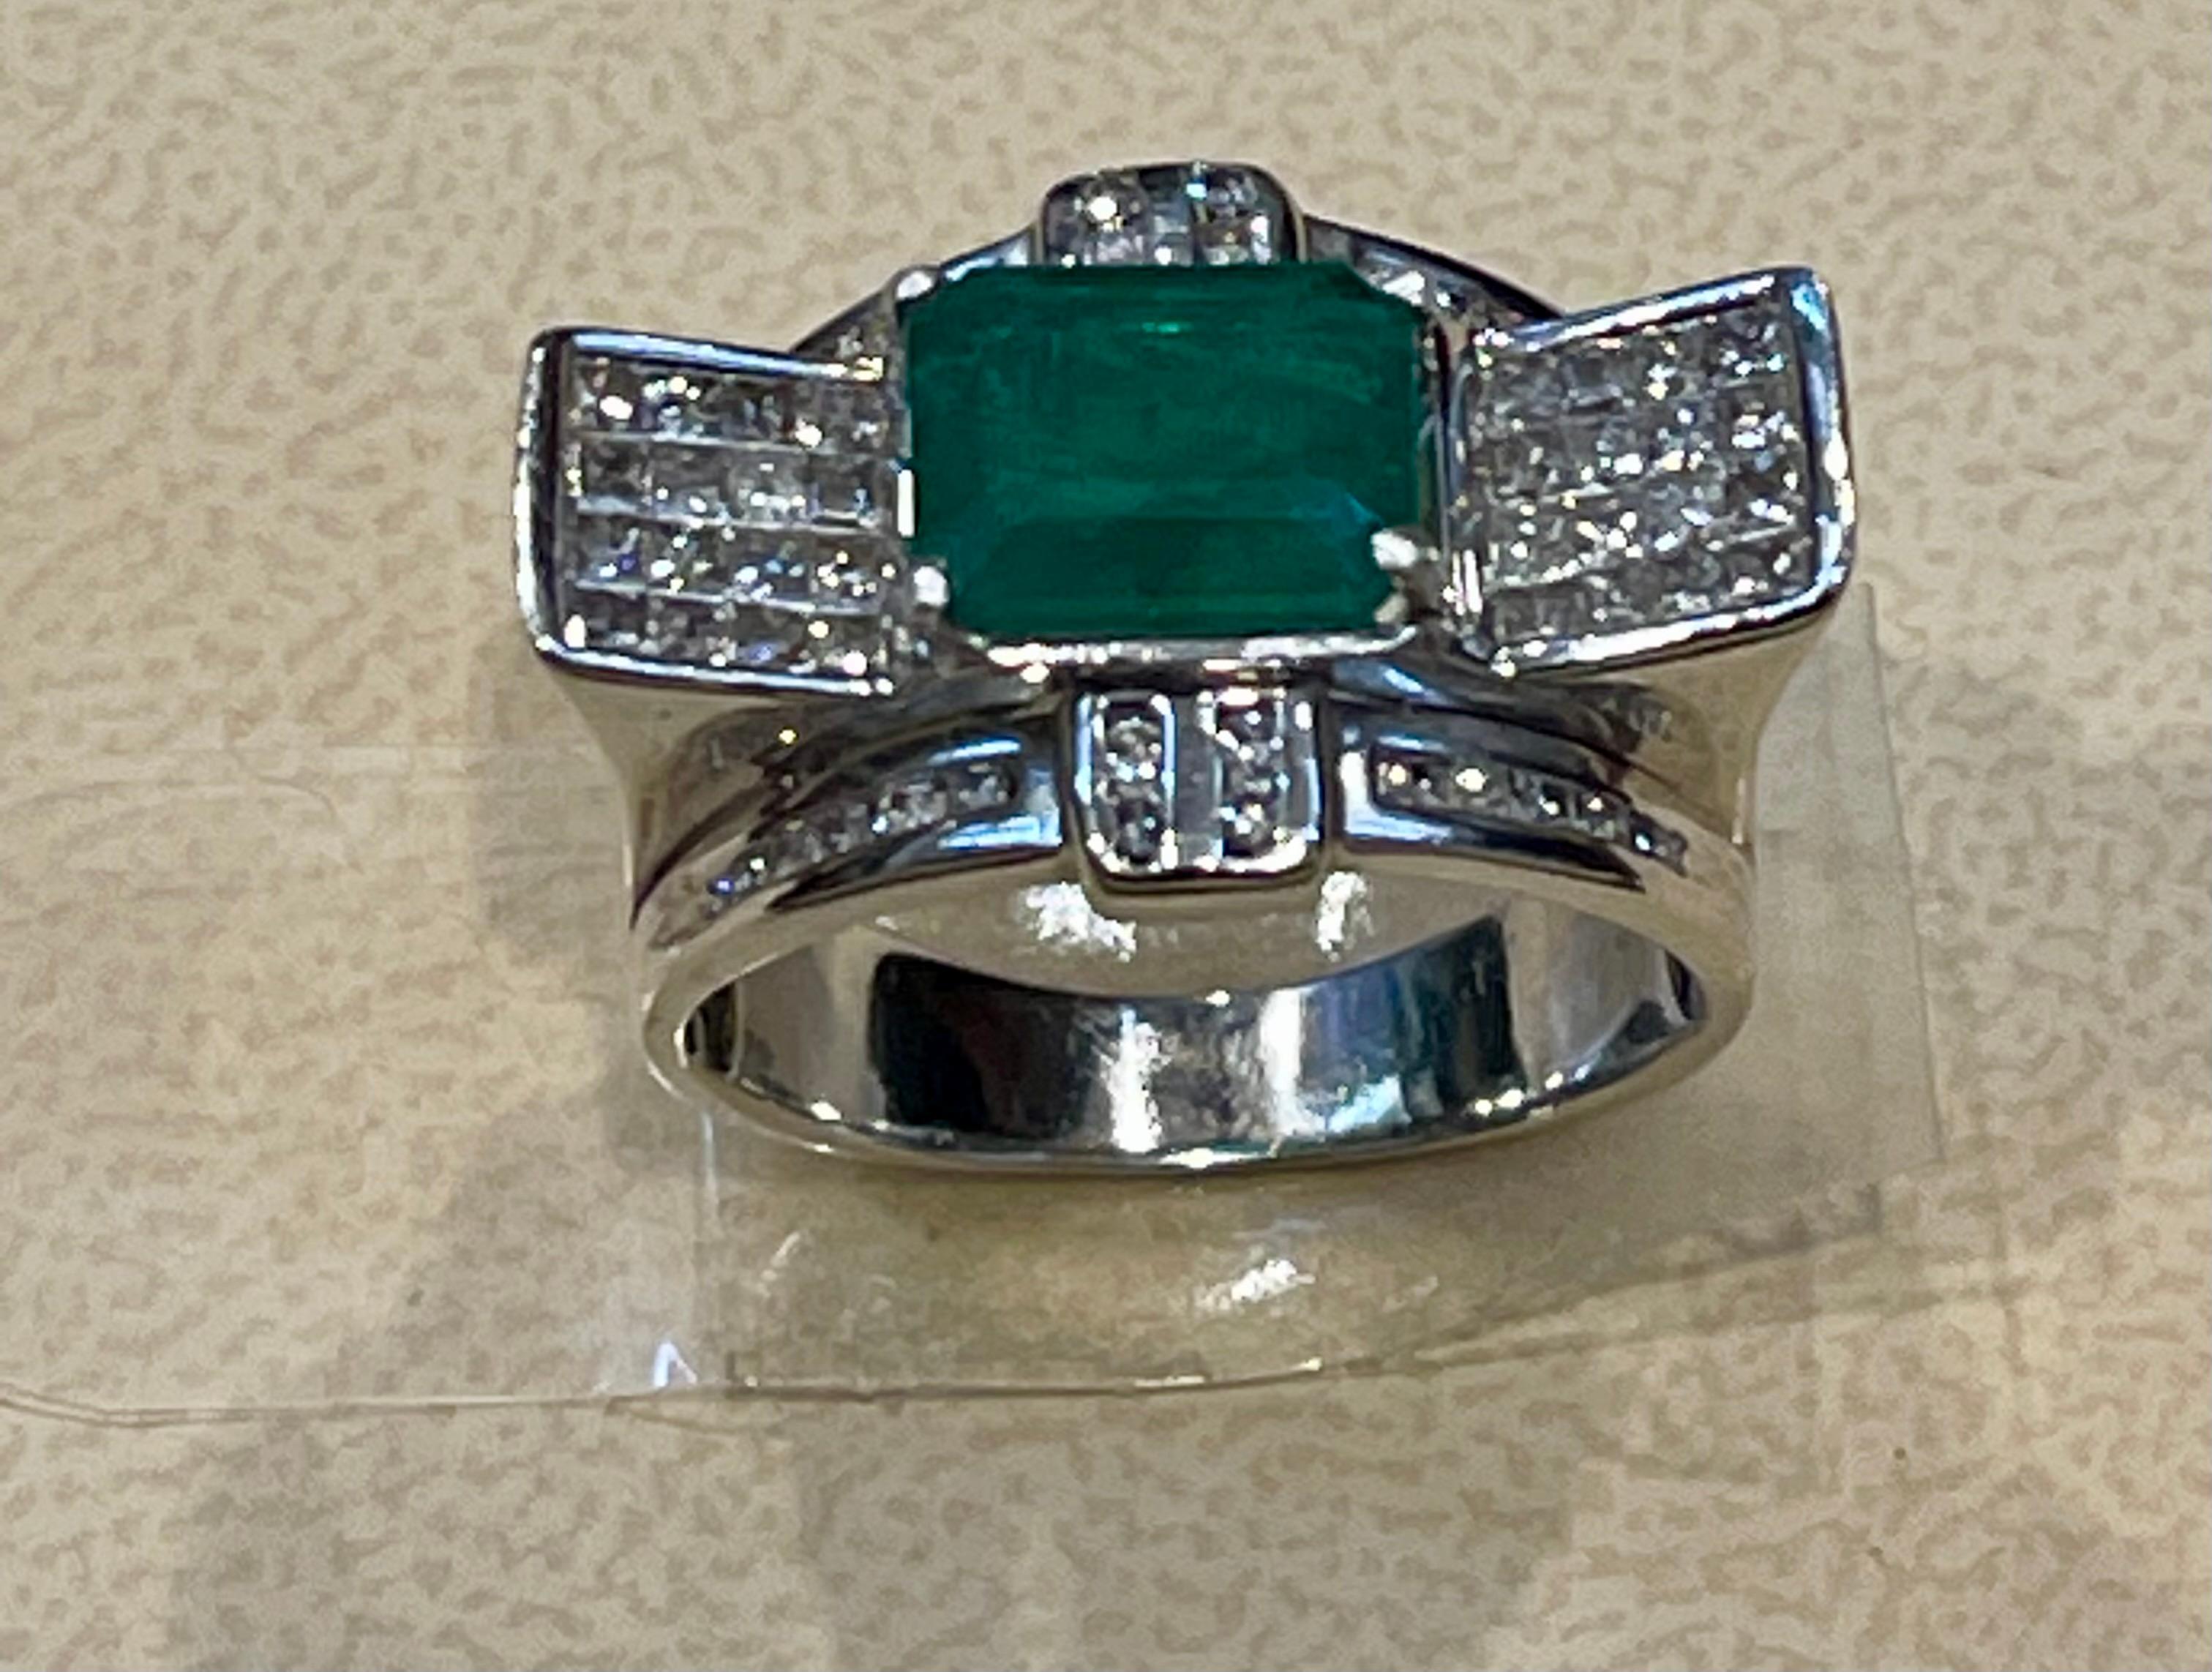 A classic, Cocktail ring 
Approximately 4 Carat  Emerald and Diamond Ring, Estate
Gold: 14 Karat  white gold 
Weight: 11.68 gm
 Diamonds: approximate 1.0 Carat 
14K stamped
Measurements of the Emerald is 8X10 which comes out to Estimated Weight 4